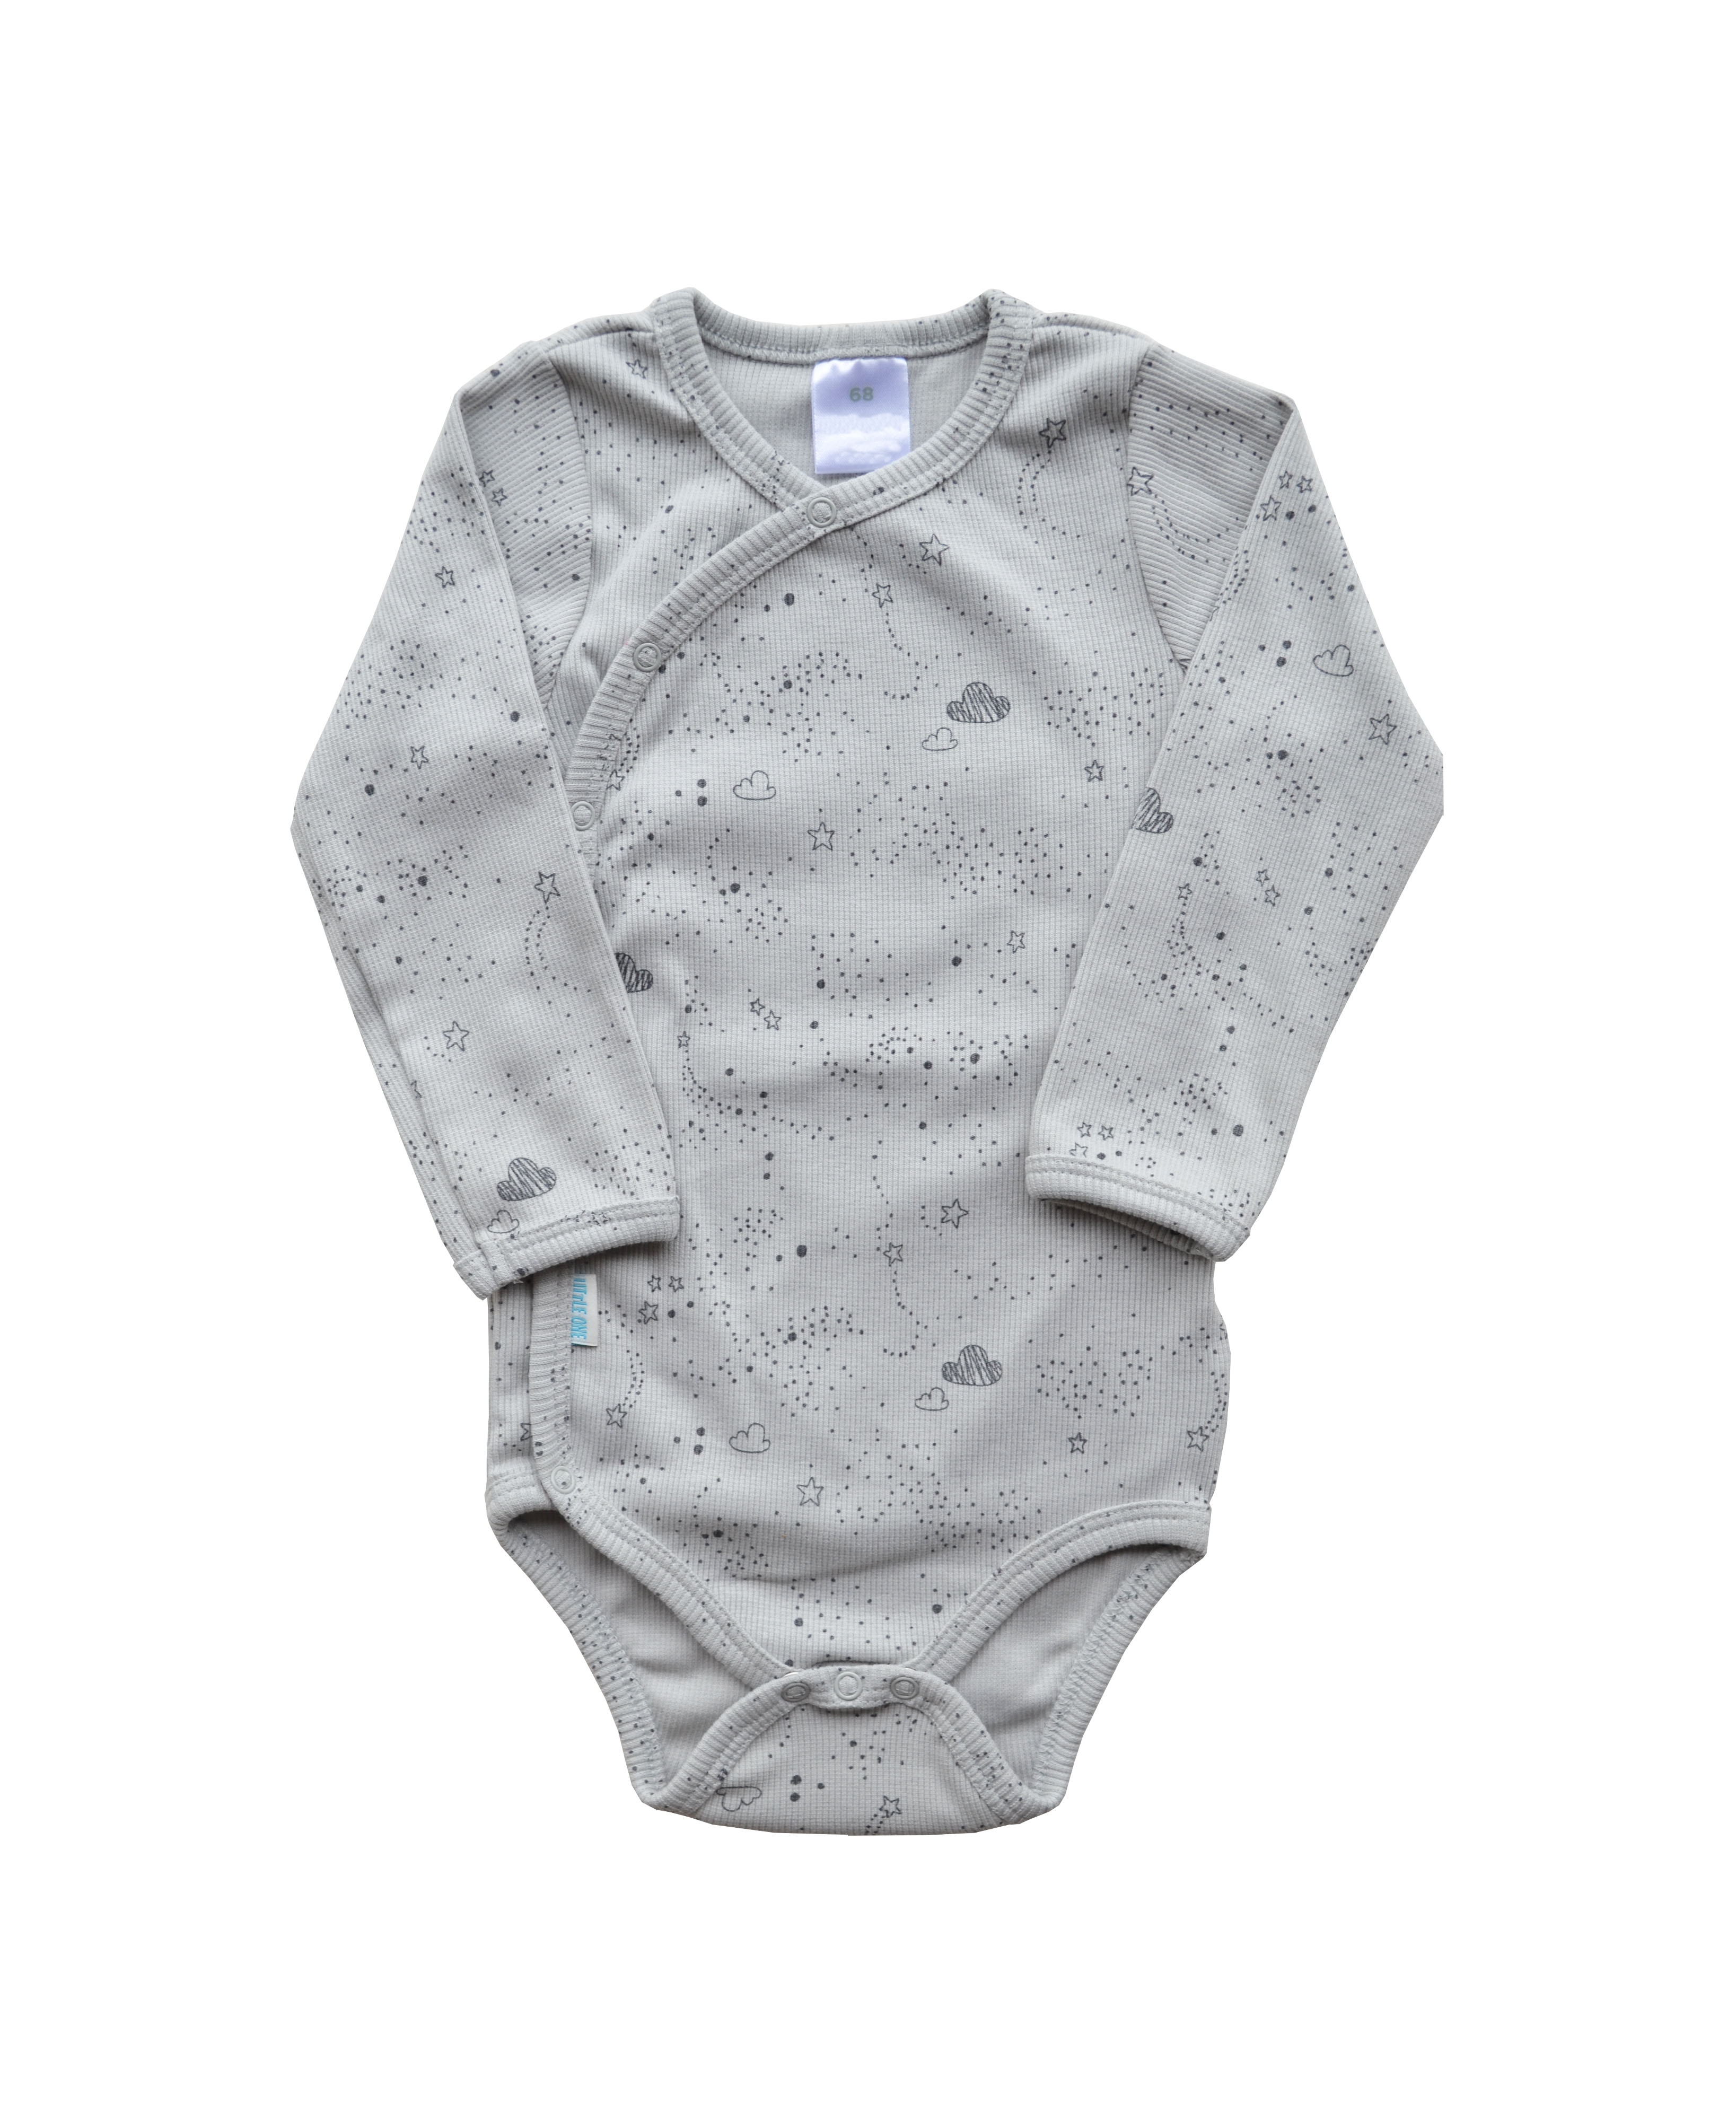 Babeez | Allover Stars and Cloud print on Grey Long Sleeved Bodysuit (100% Cotton Rib) undefined